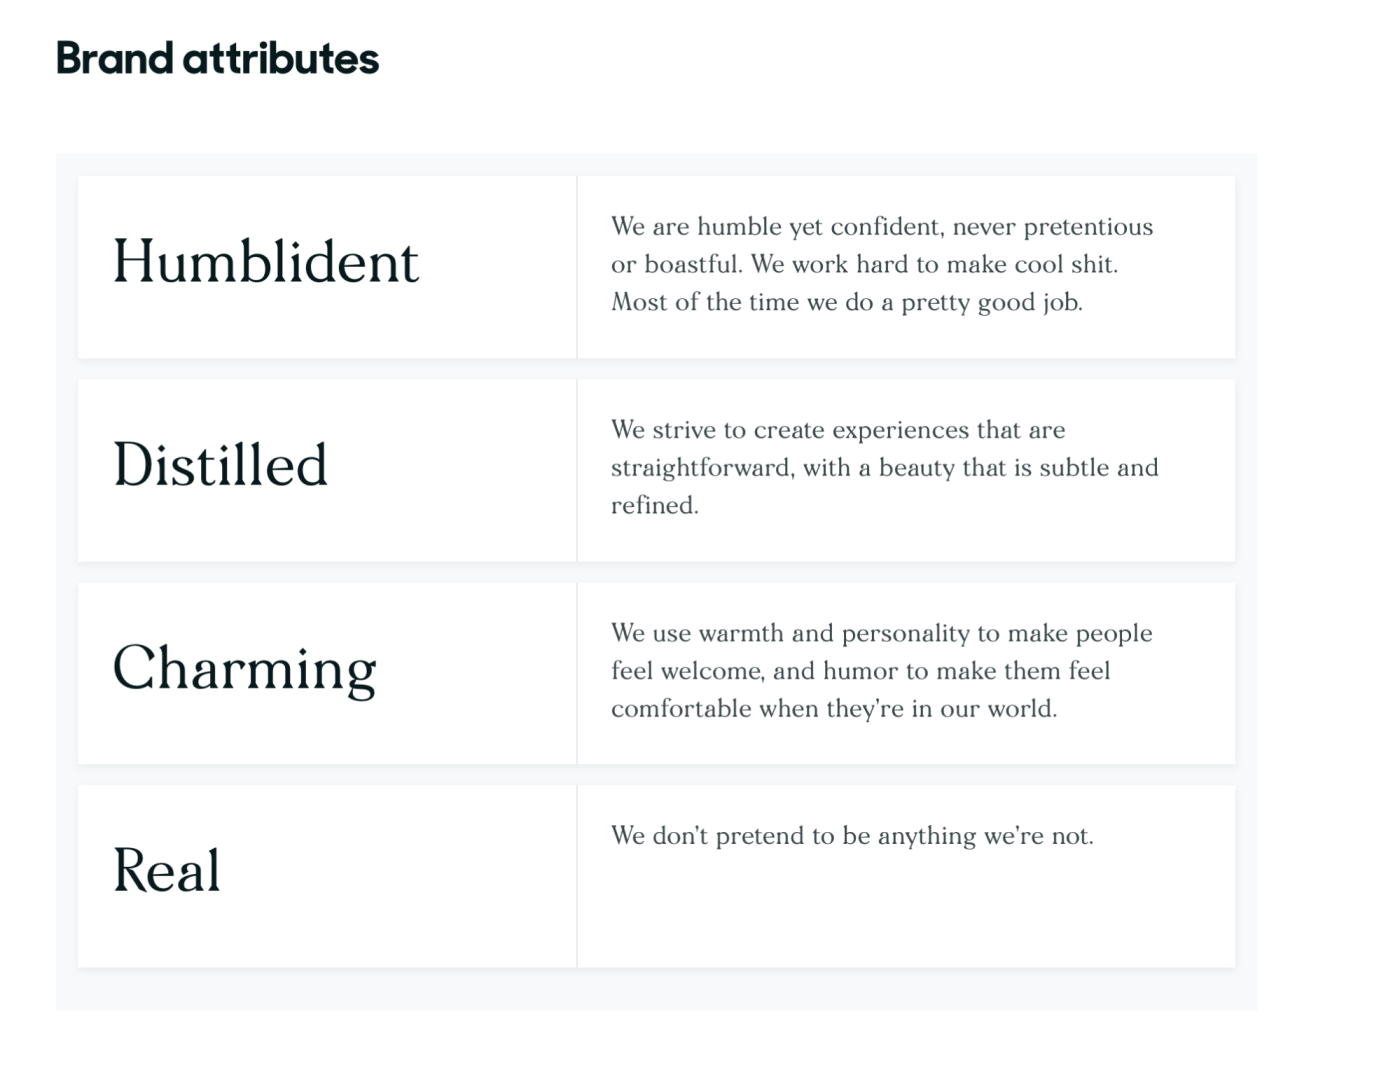 How to create a style guide—with 14 examples